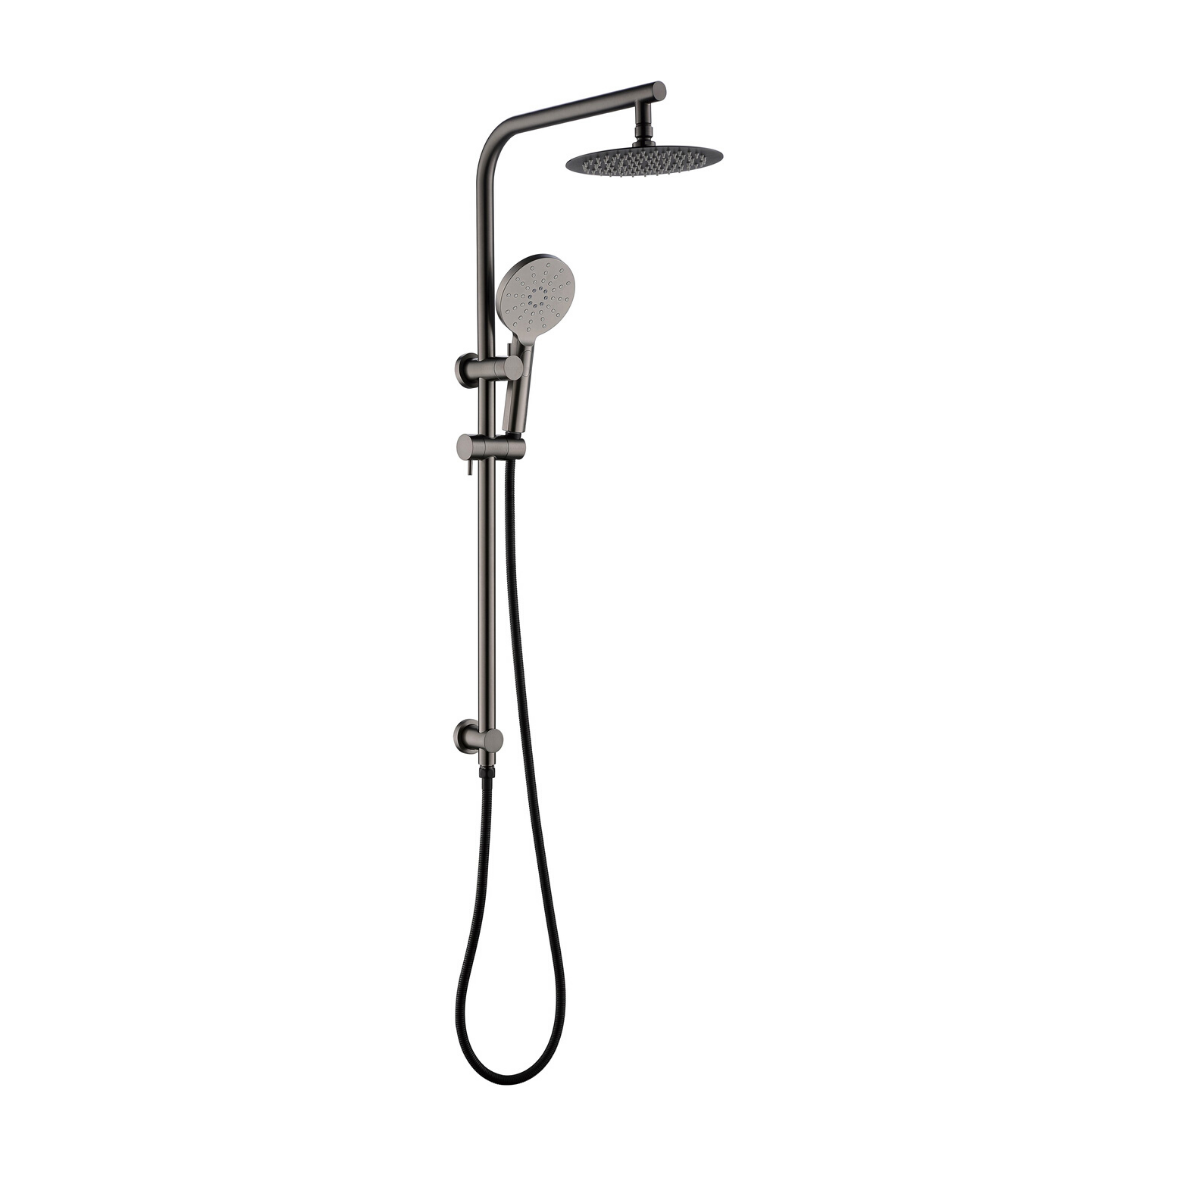 Shower Special - CLAS20 and CLAS14 Mixer